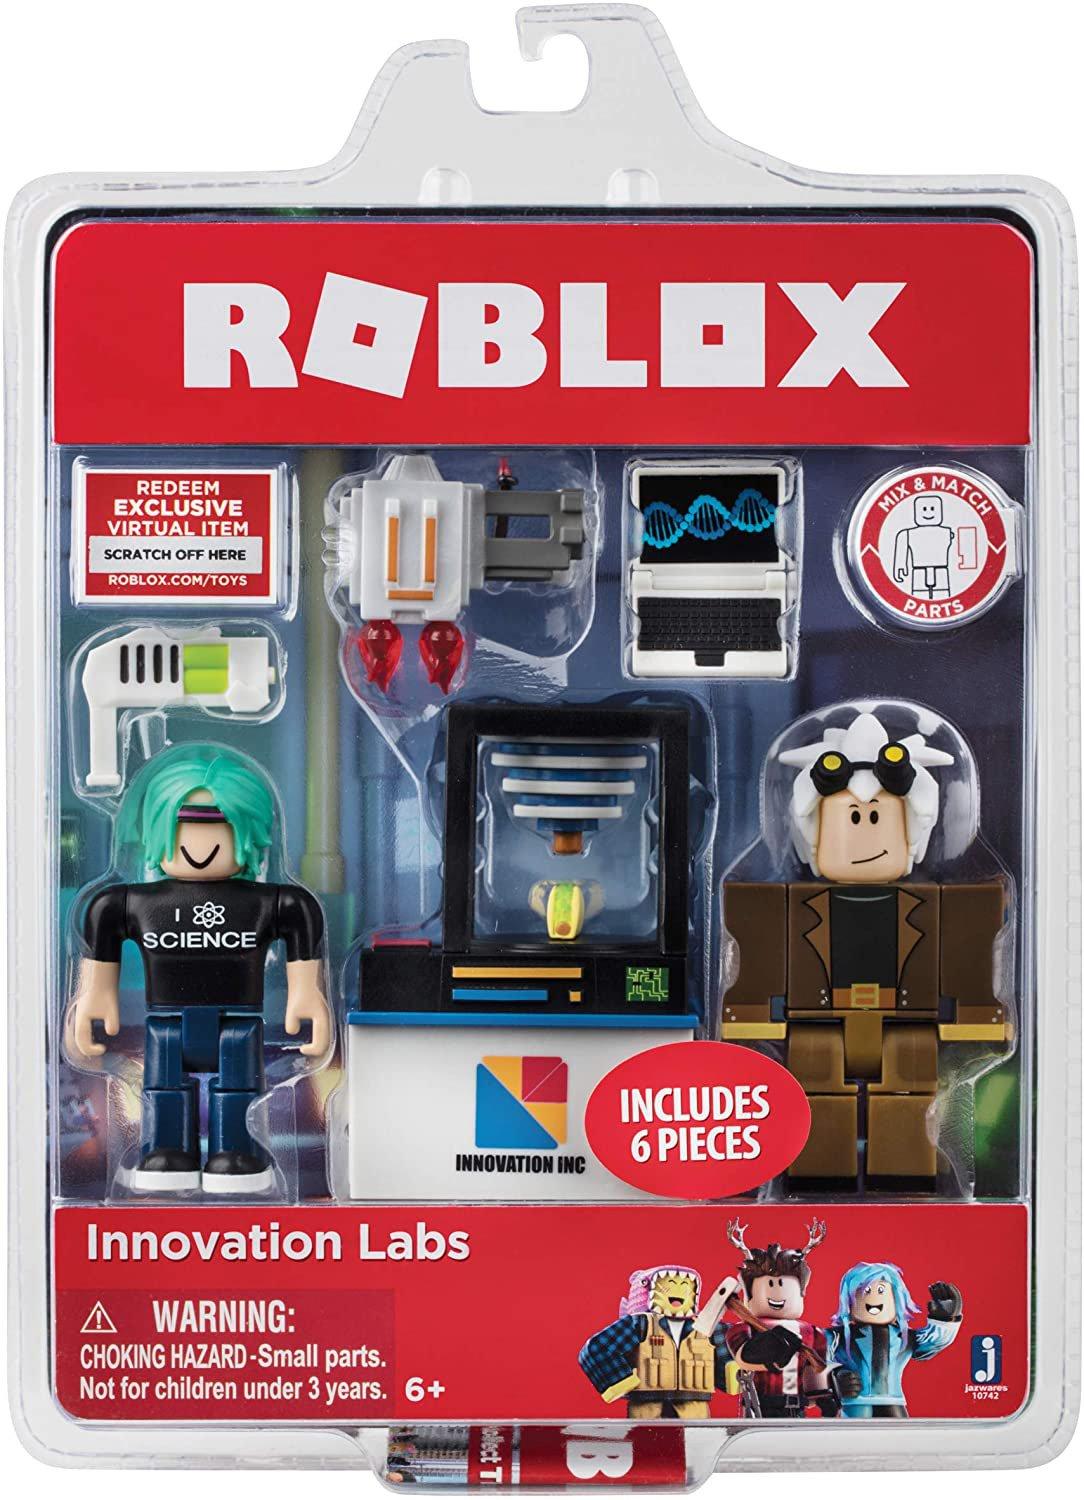 nintendo switch roblox game card